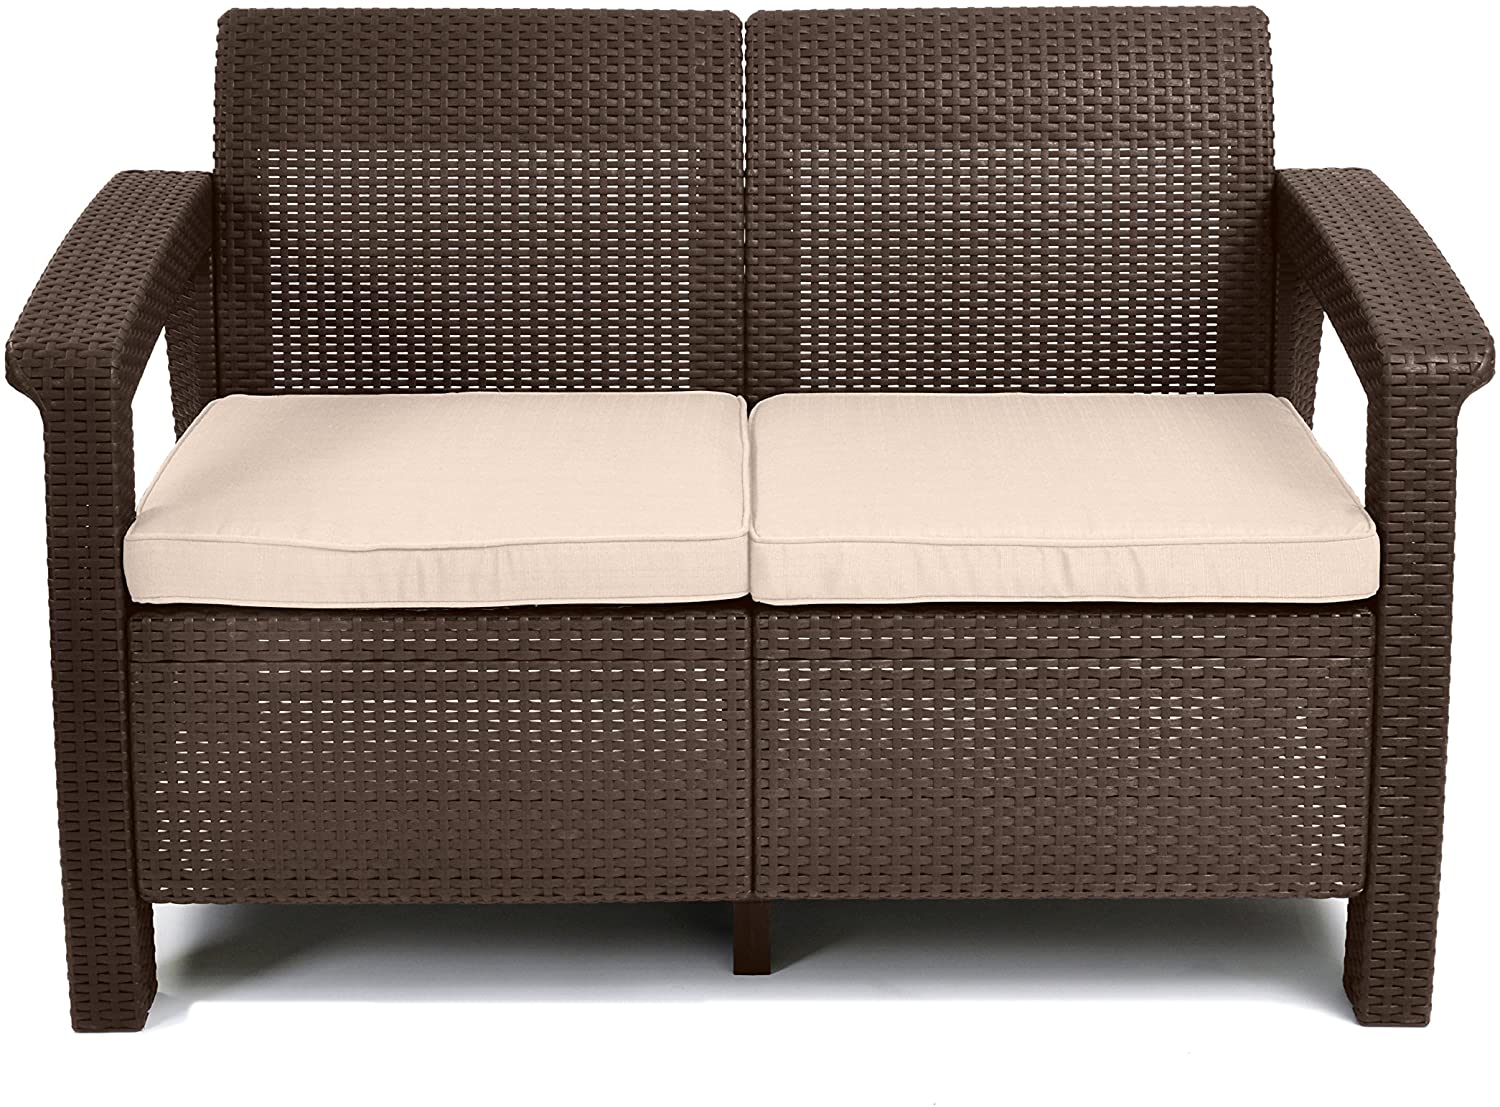 Keter Corfu Resin Wicker Outdoor Loveseat Patio Couch with Washable Cushions - Perfect for Balcony, Deck, and Poolside Seating and Furniture Sets, Brown